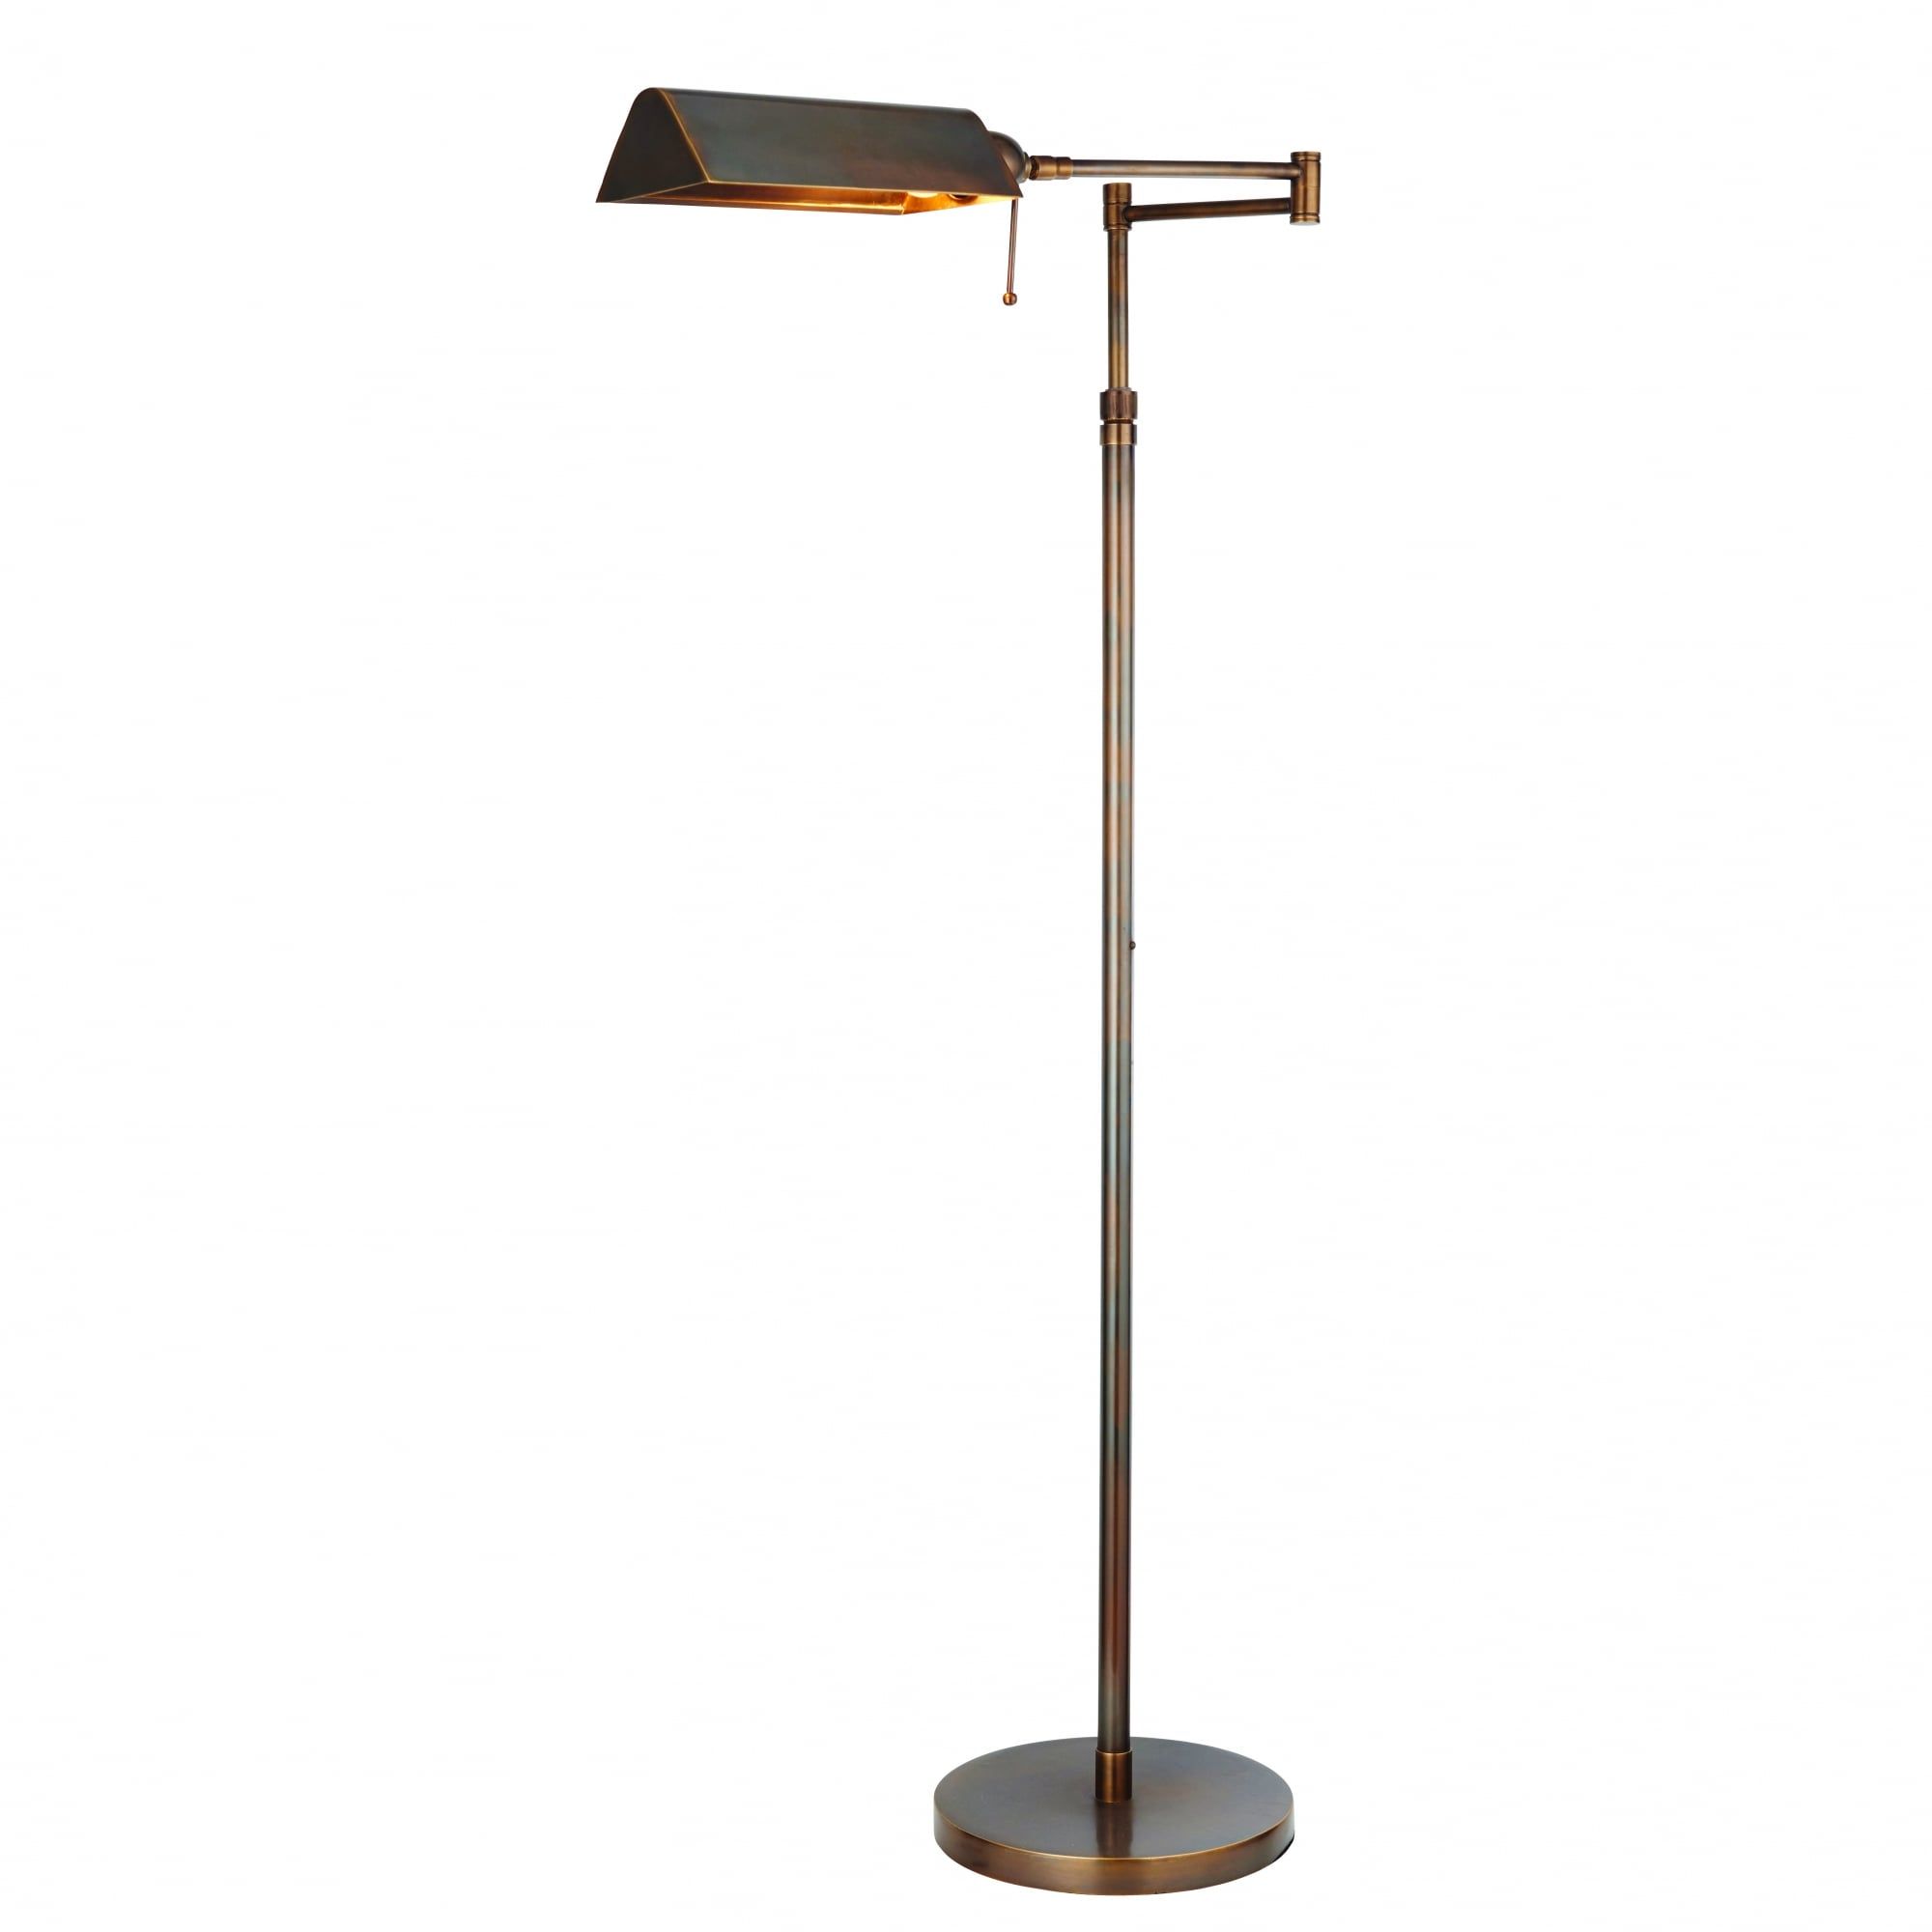 Dark Antique Swing Arm Standard Lamp In Traditional Period Styling Within Adjustble Arm Floor Lamps (View 14 of 15)